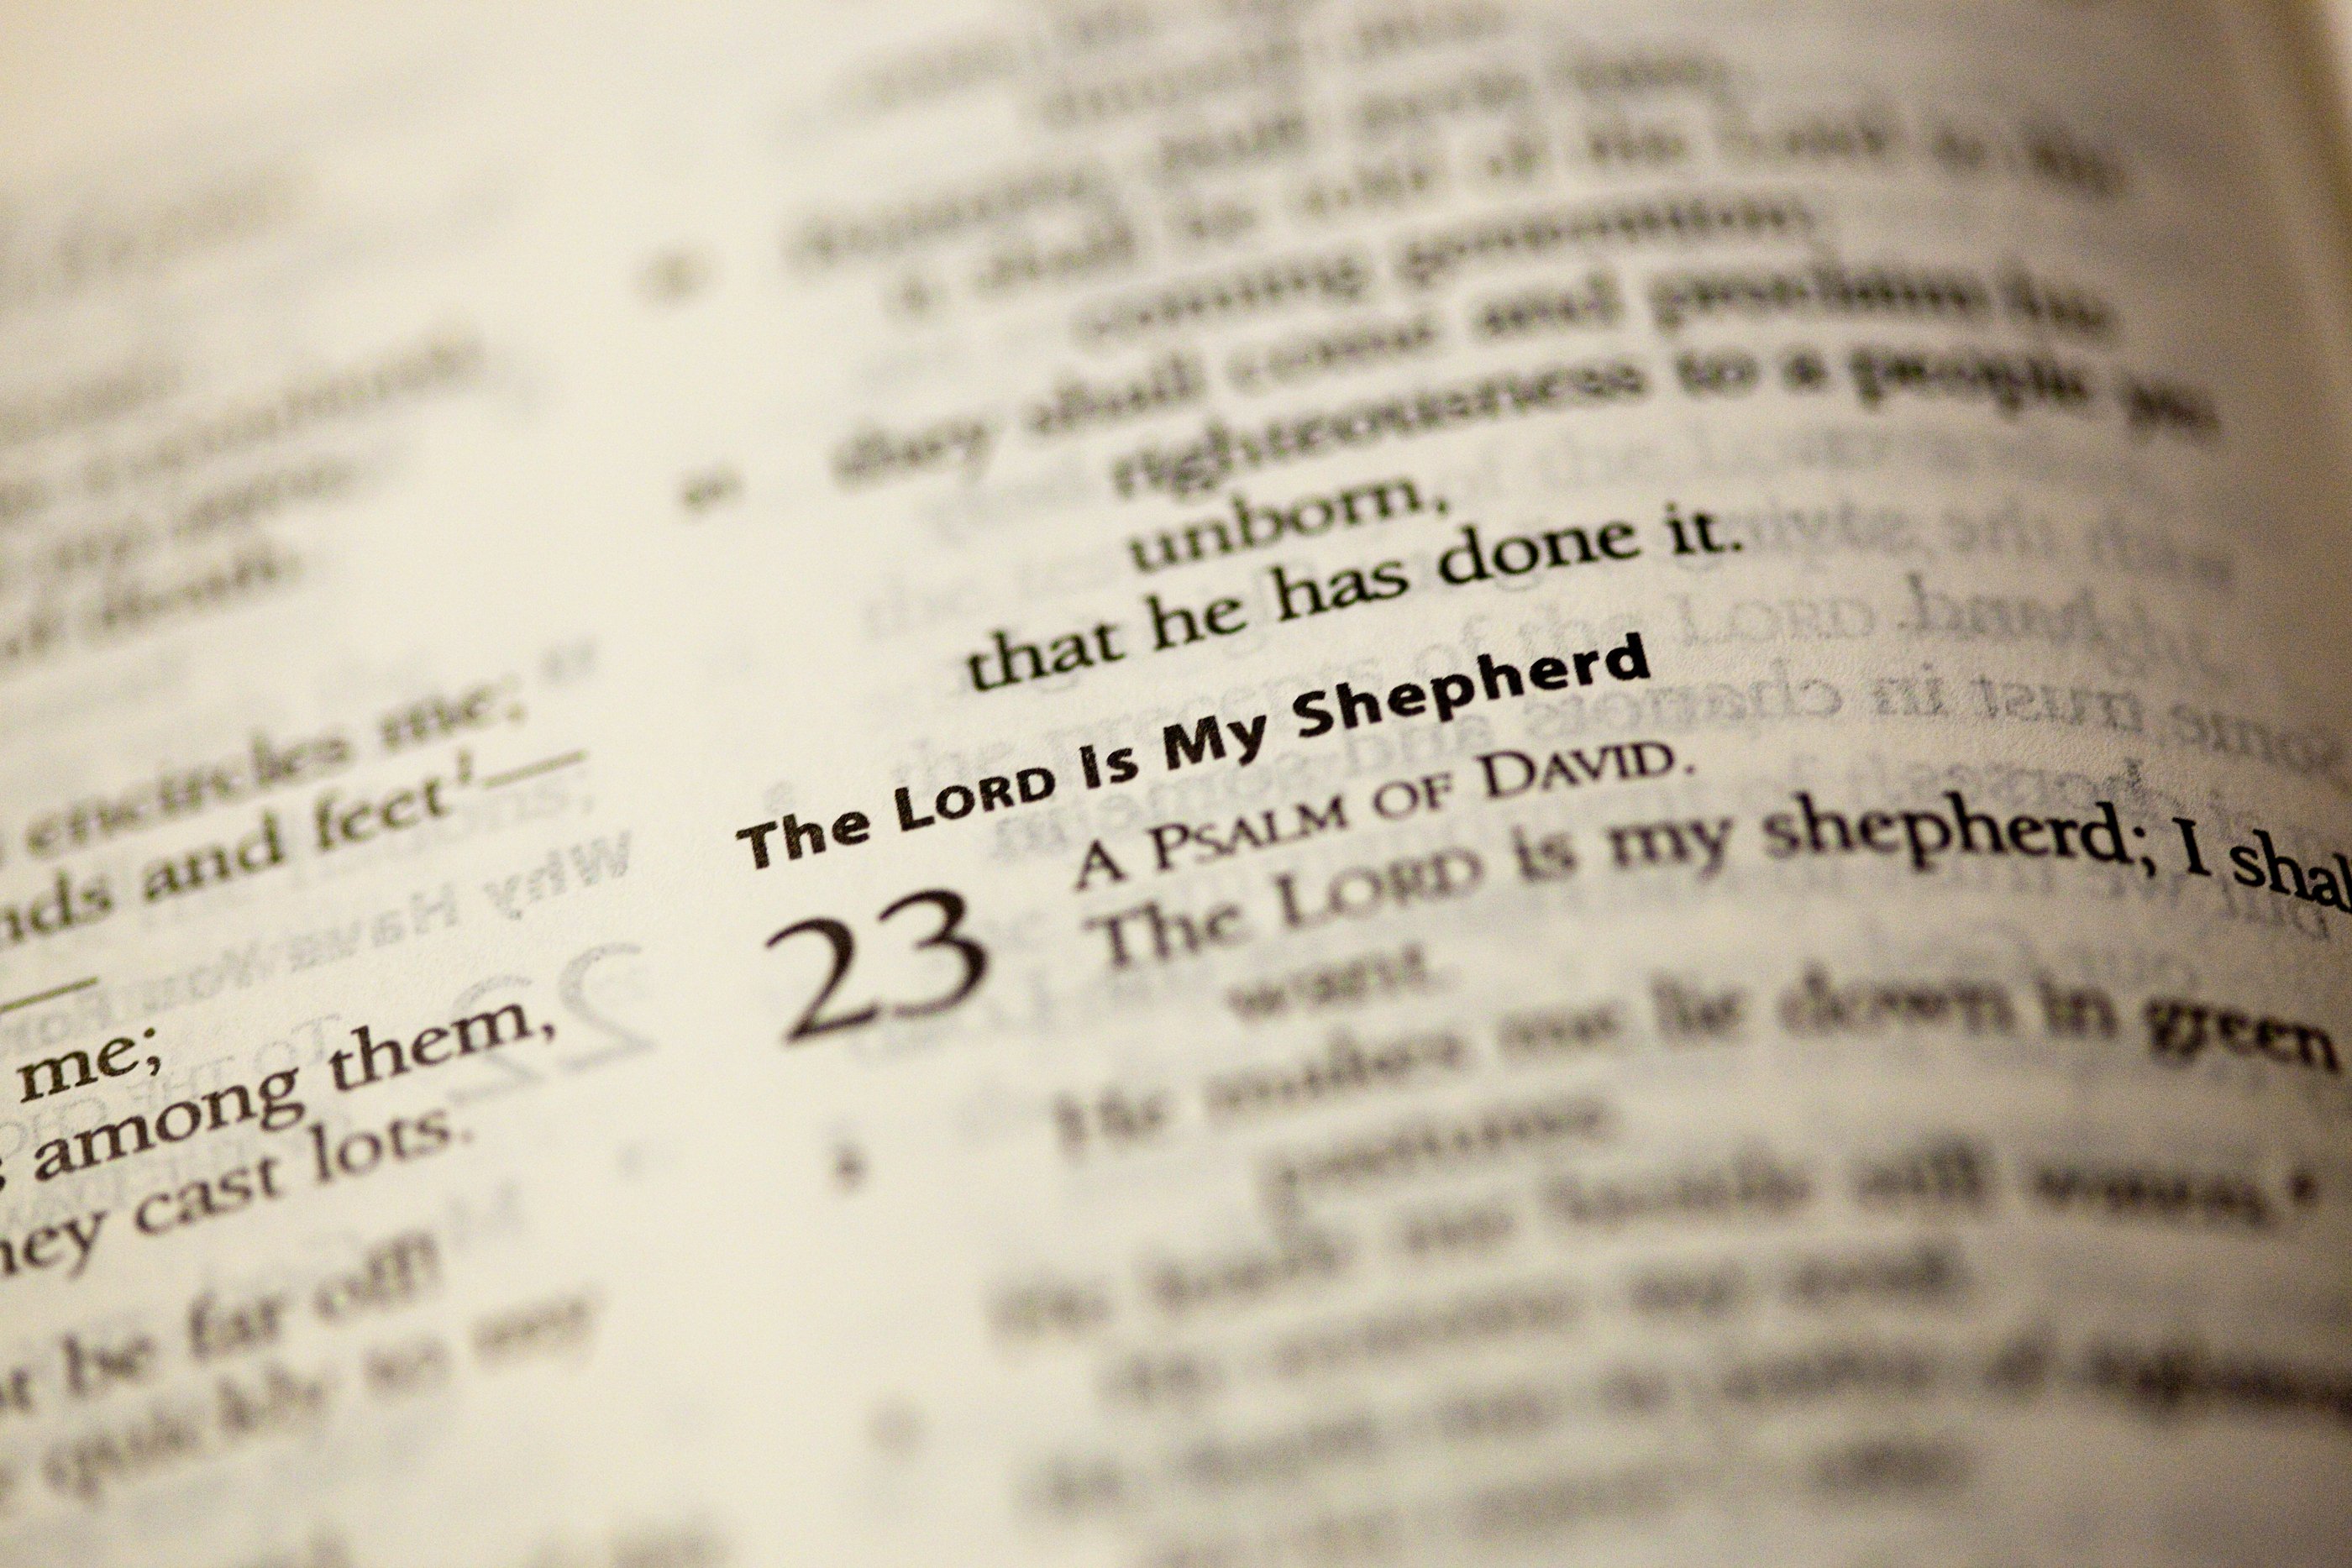 Psalm 23 and the Apostles' Creed